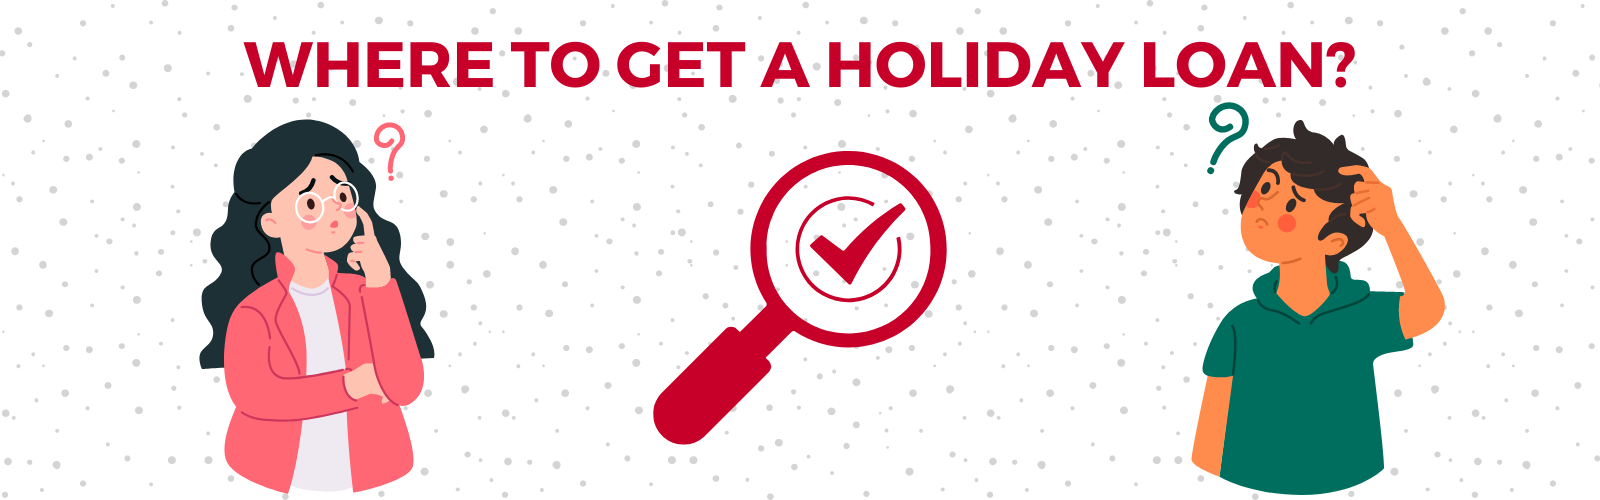 Where to get a holiday loan?